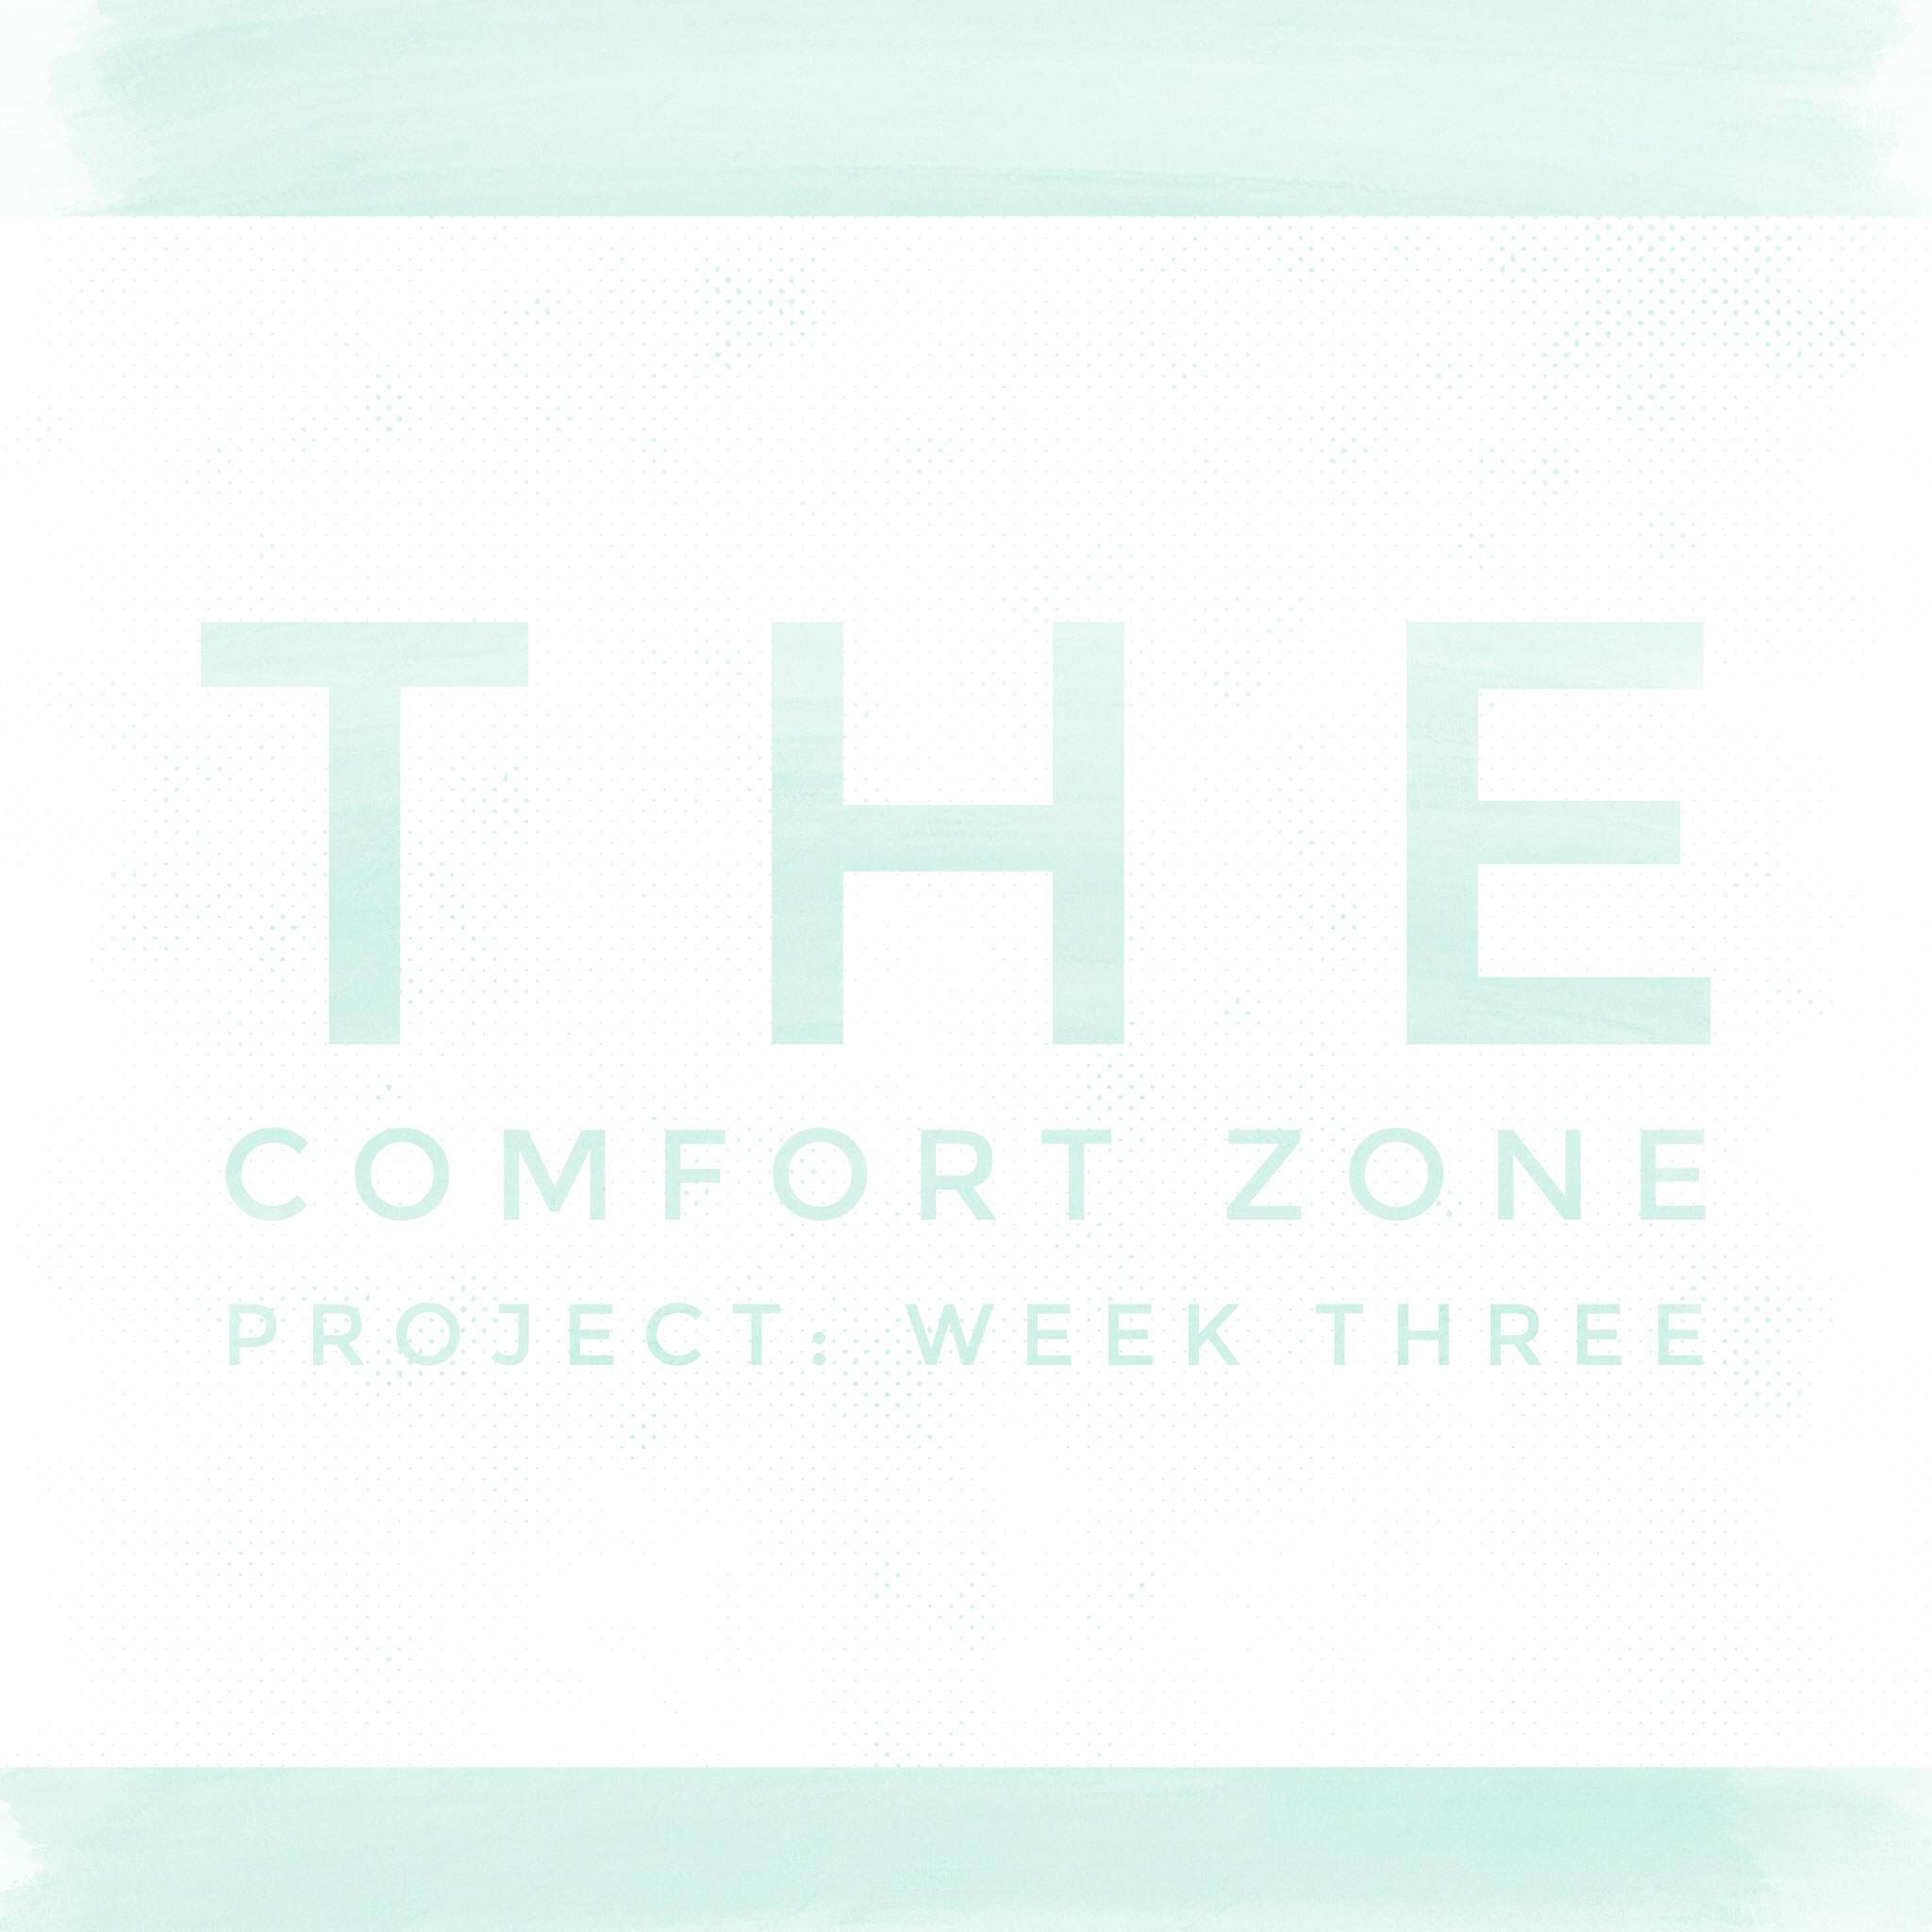 The Comfort Zone Project: Week Three